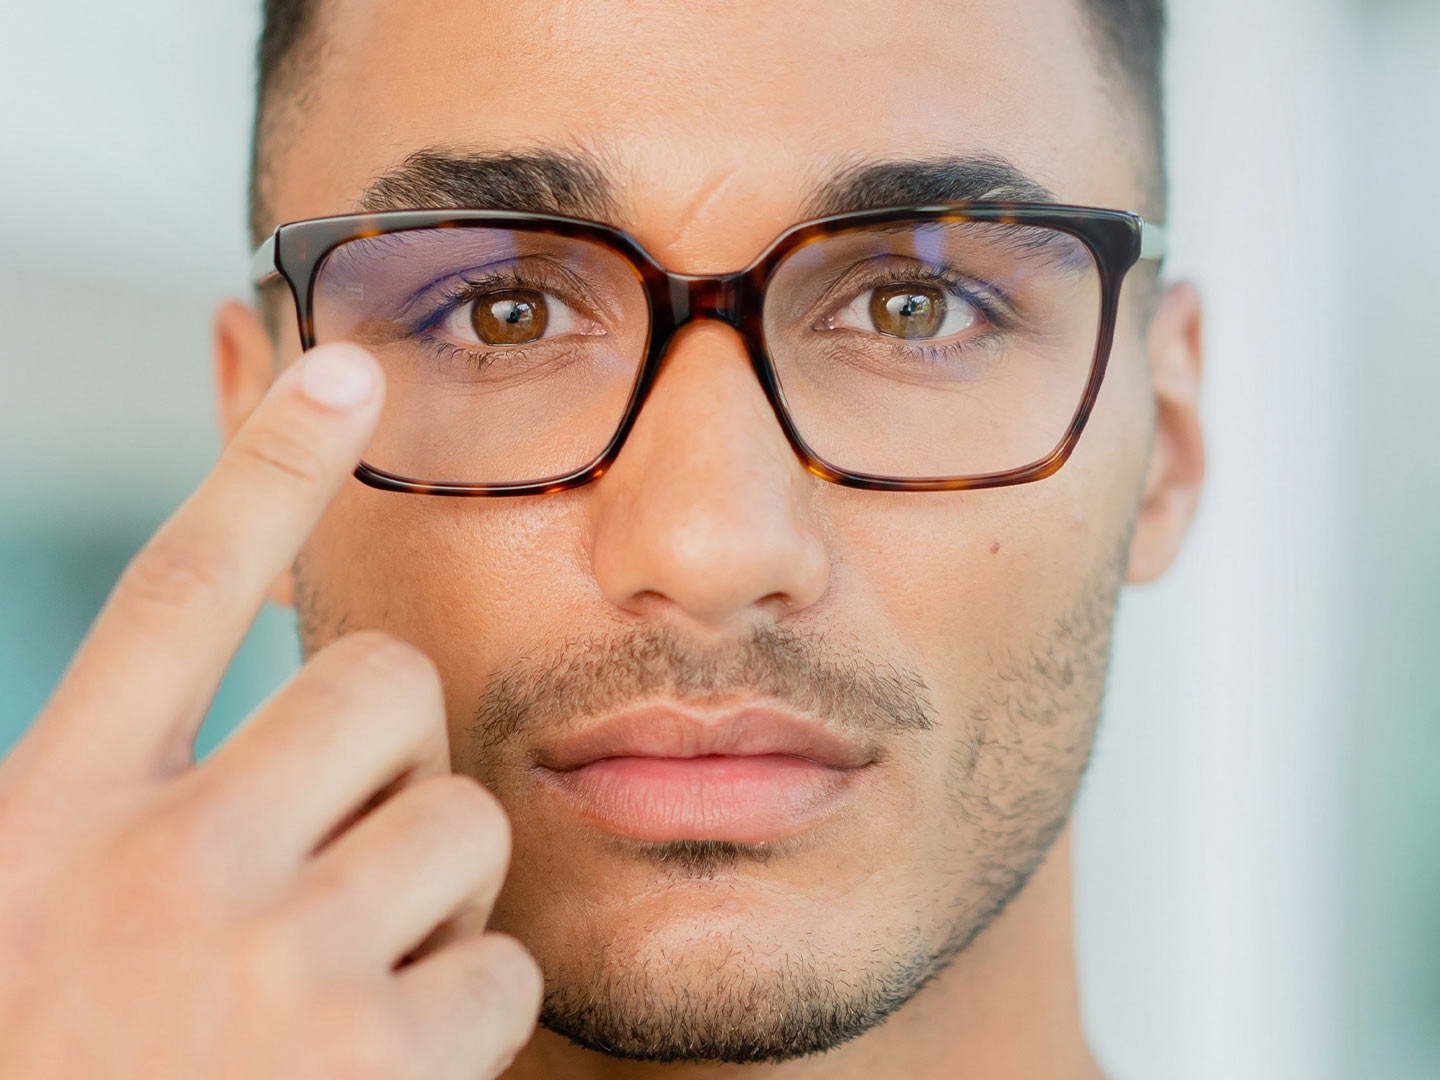 A man with glasses touching the surface of his glasses